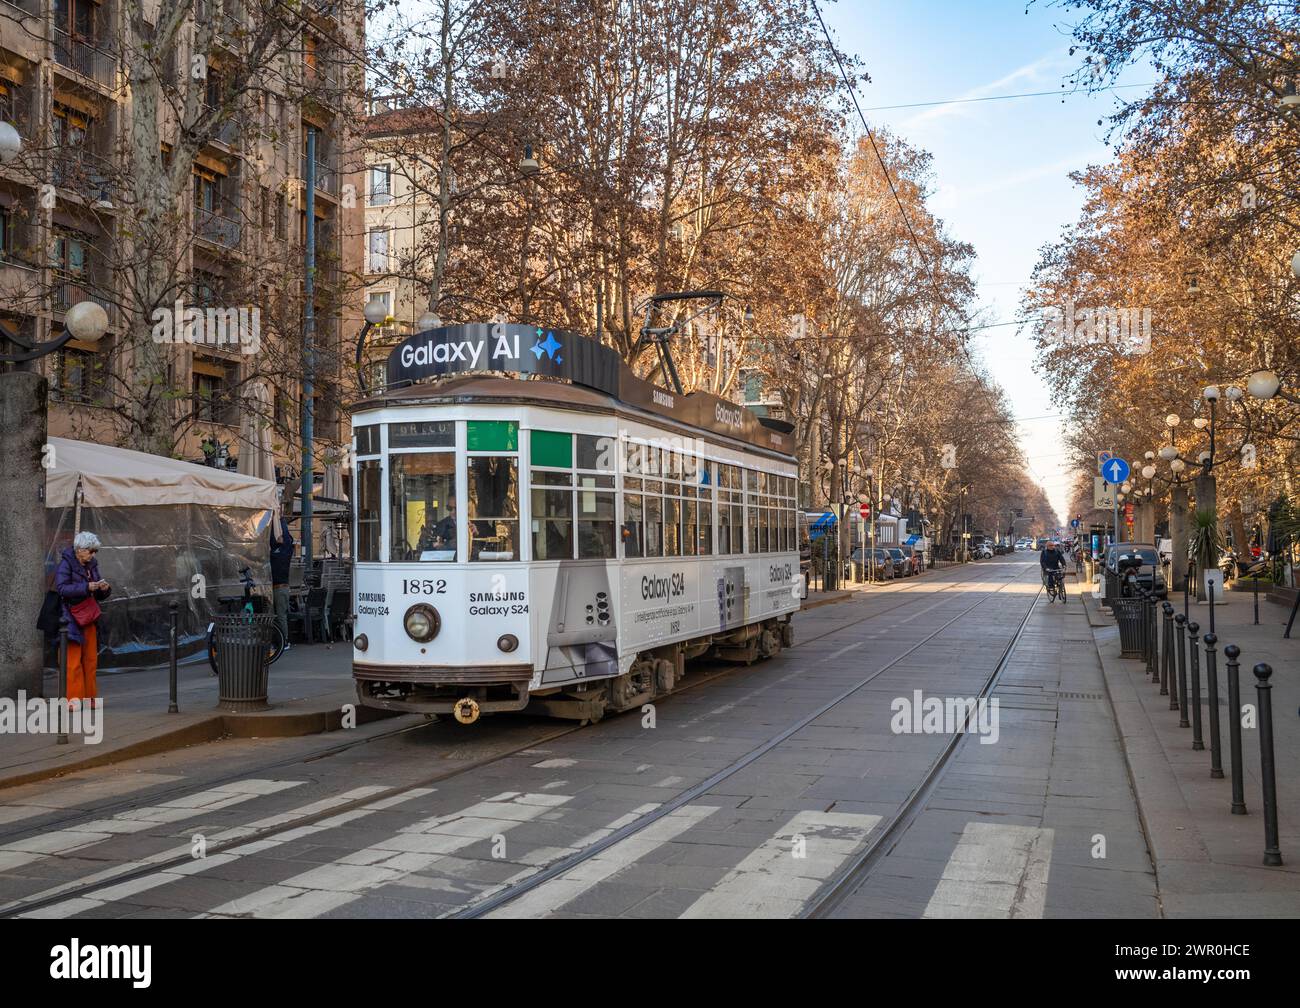 Carrozze tram number 1852, one of the 1928 vintage electric trams still in operation in Milan, Italy. Stock Photo